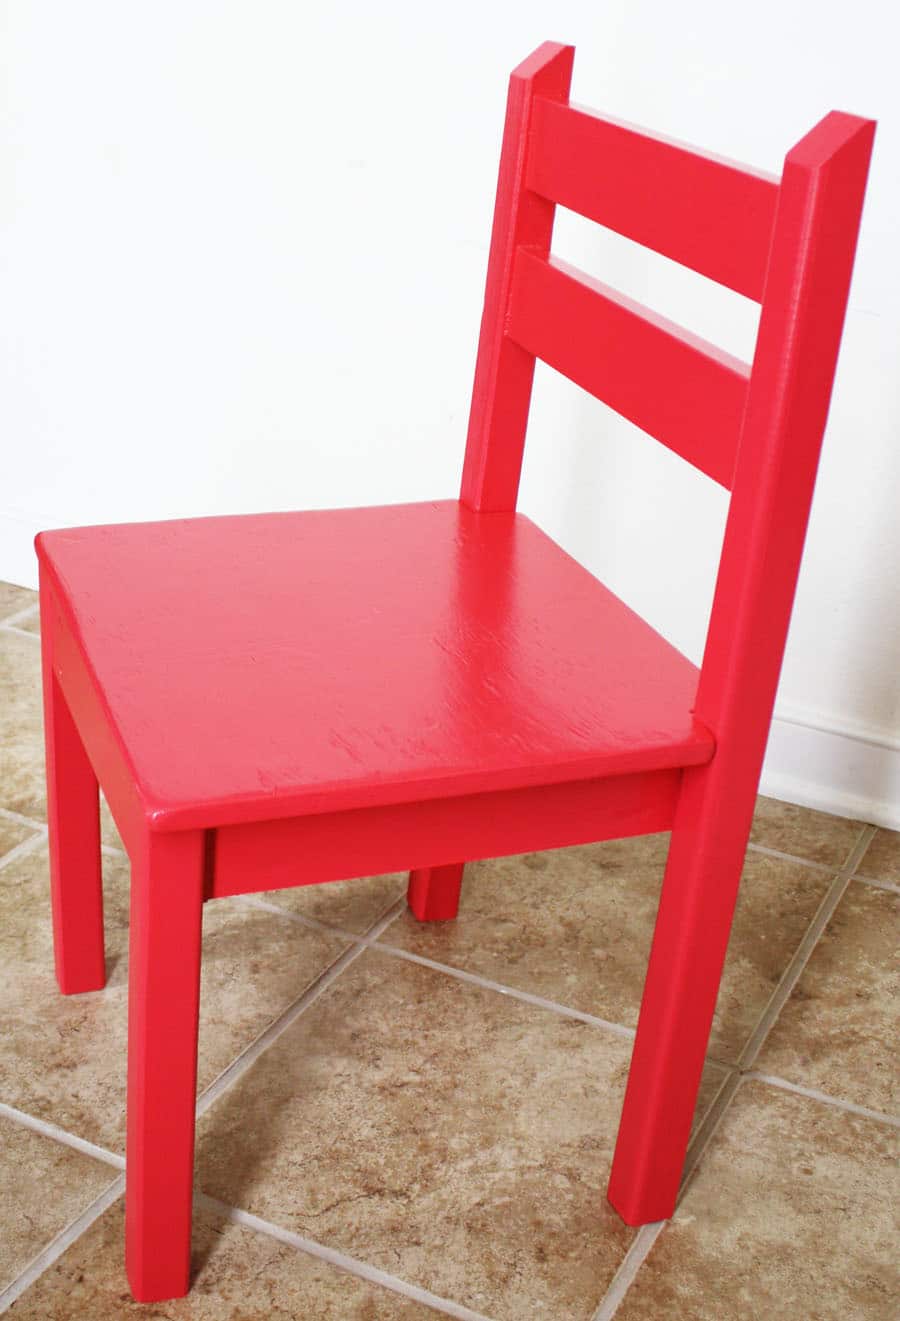 How To Build A DIY Kids Chair